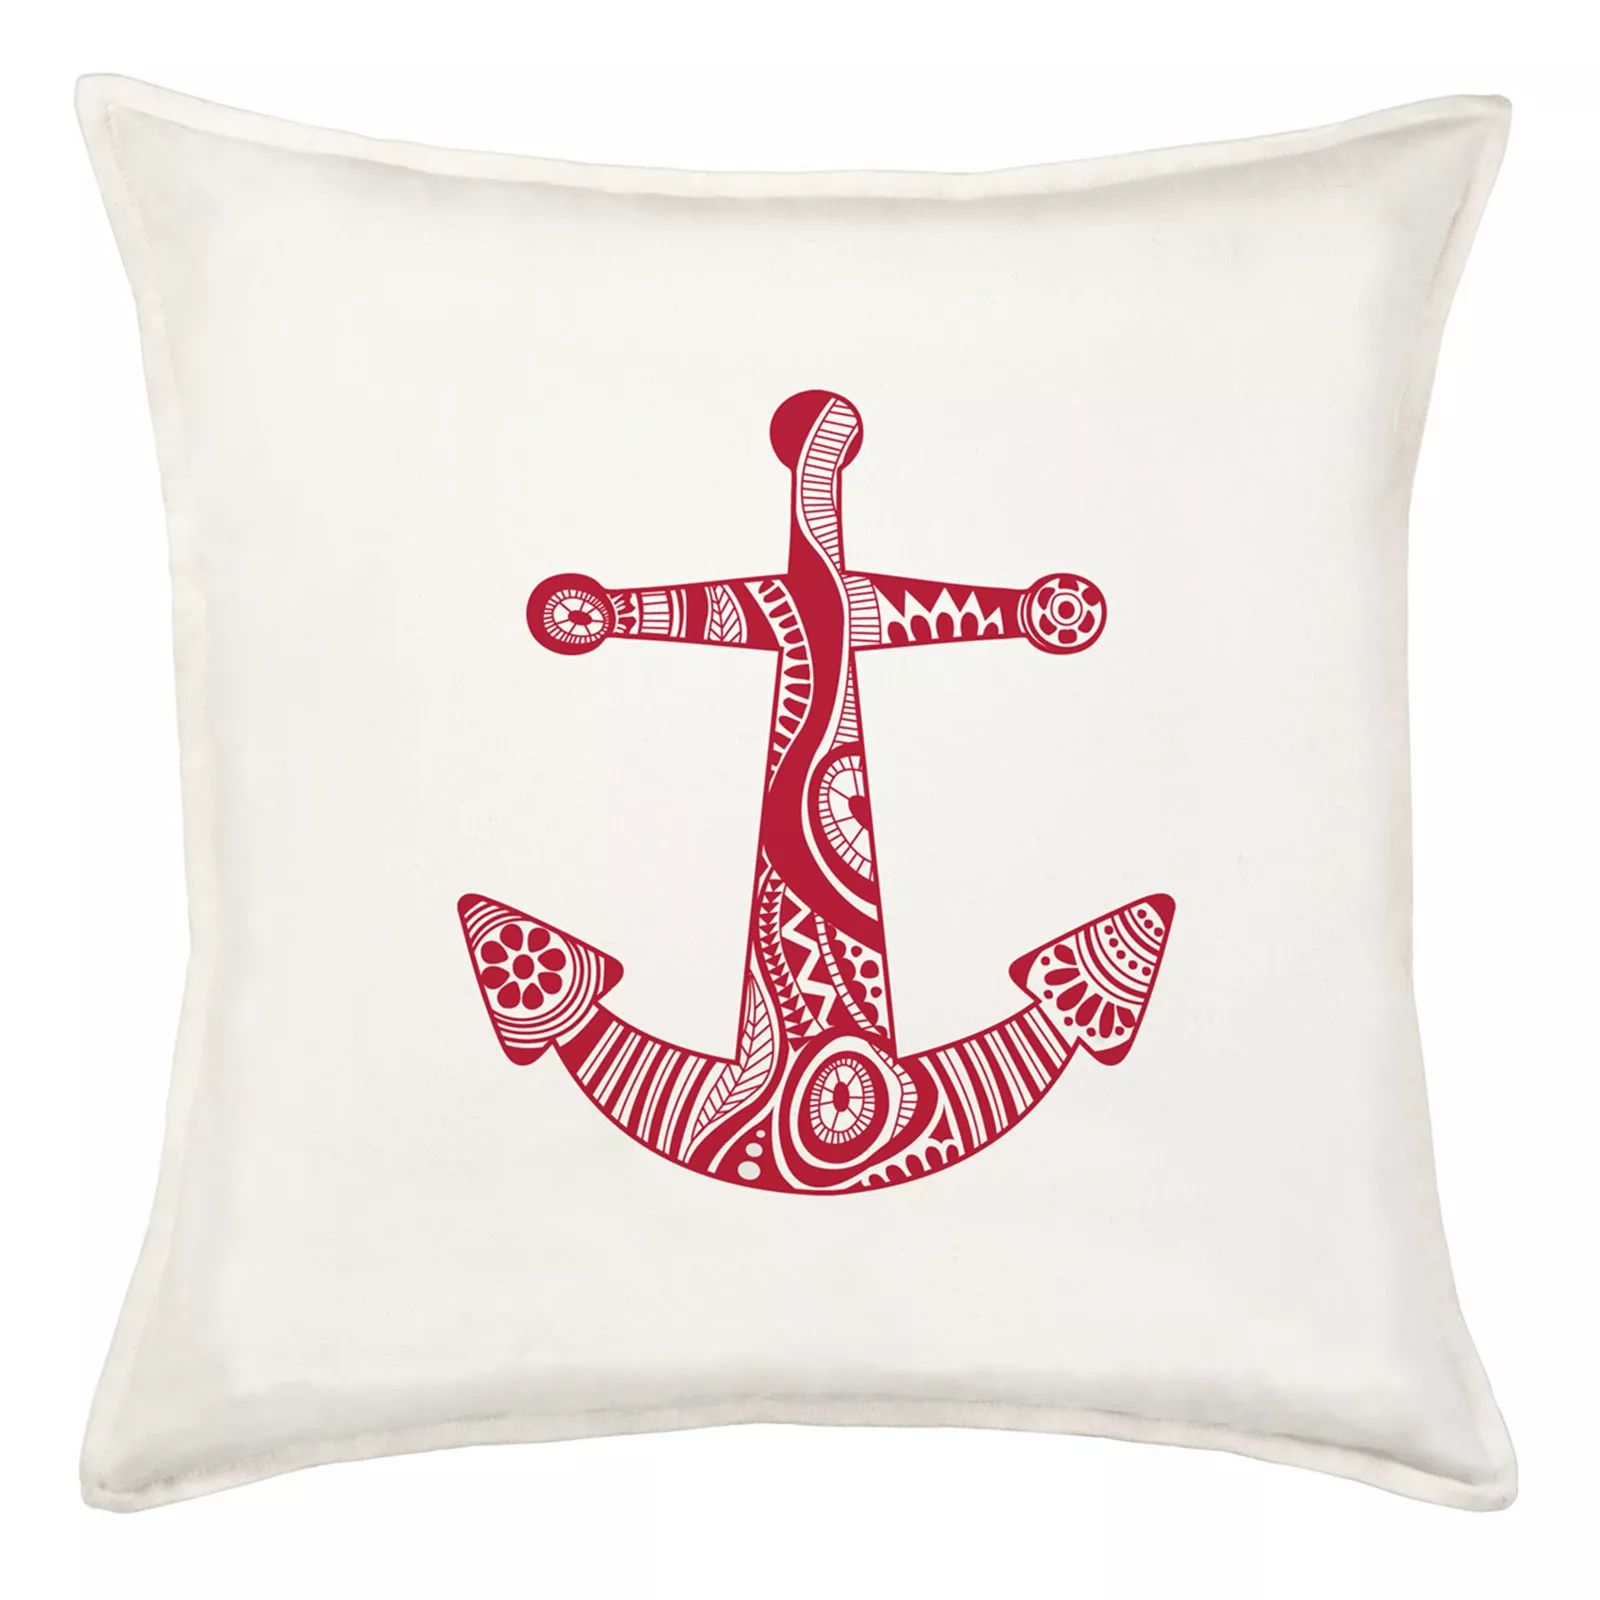 Greendale Home Fashions Anchor Throw Pillow, Red, 20X20 | Kohl's